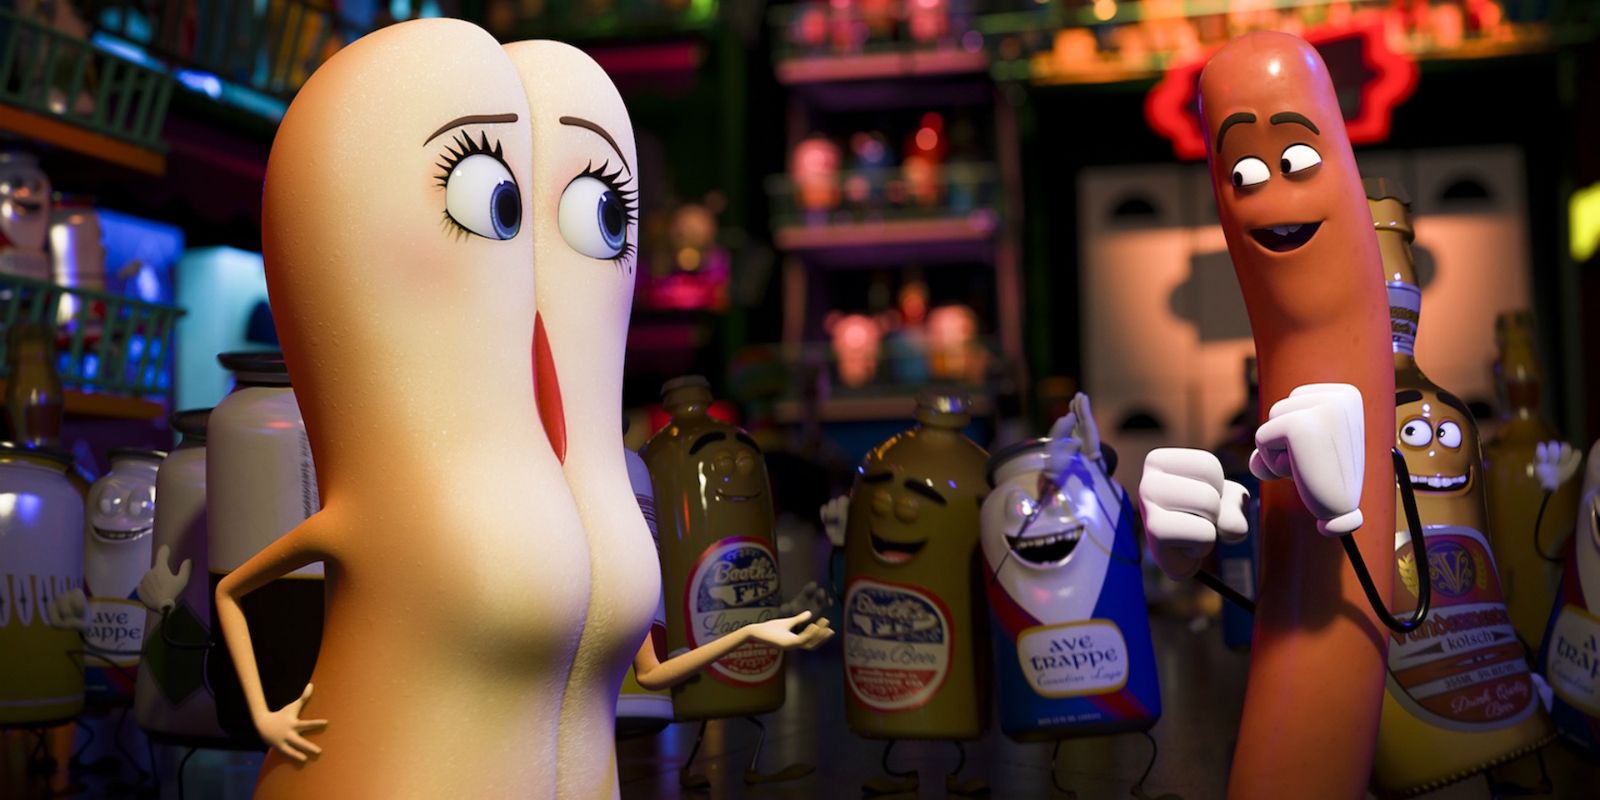 Sausage Party (2016) box office opening